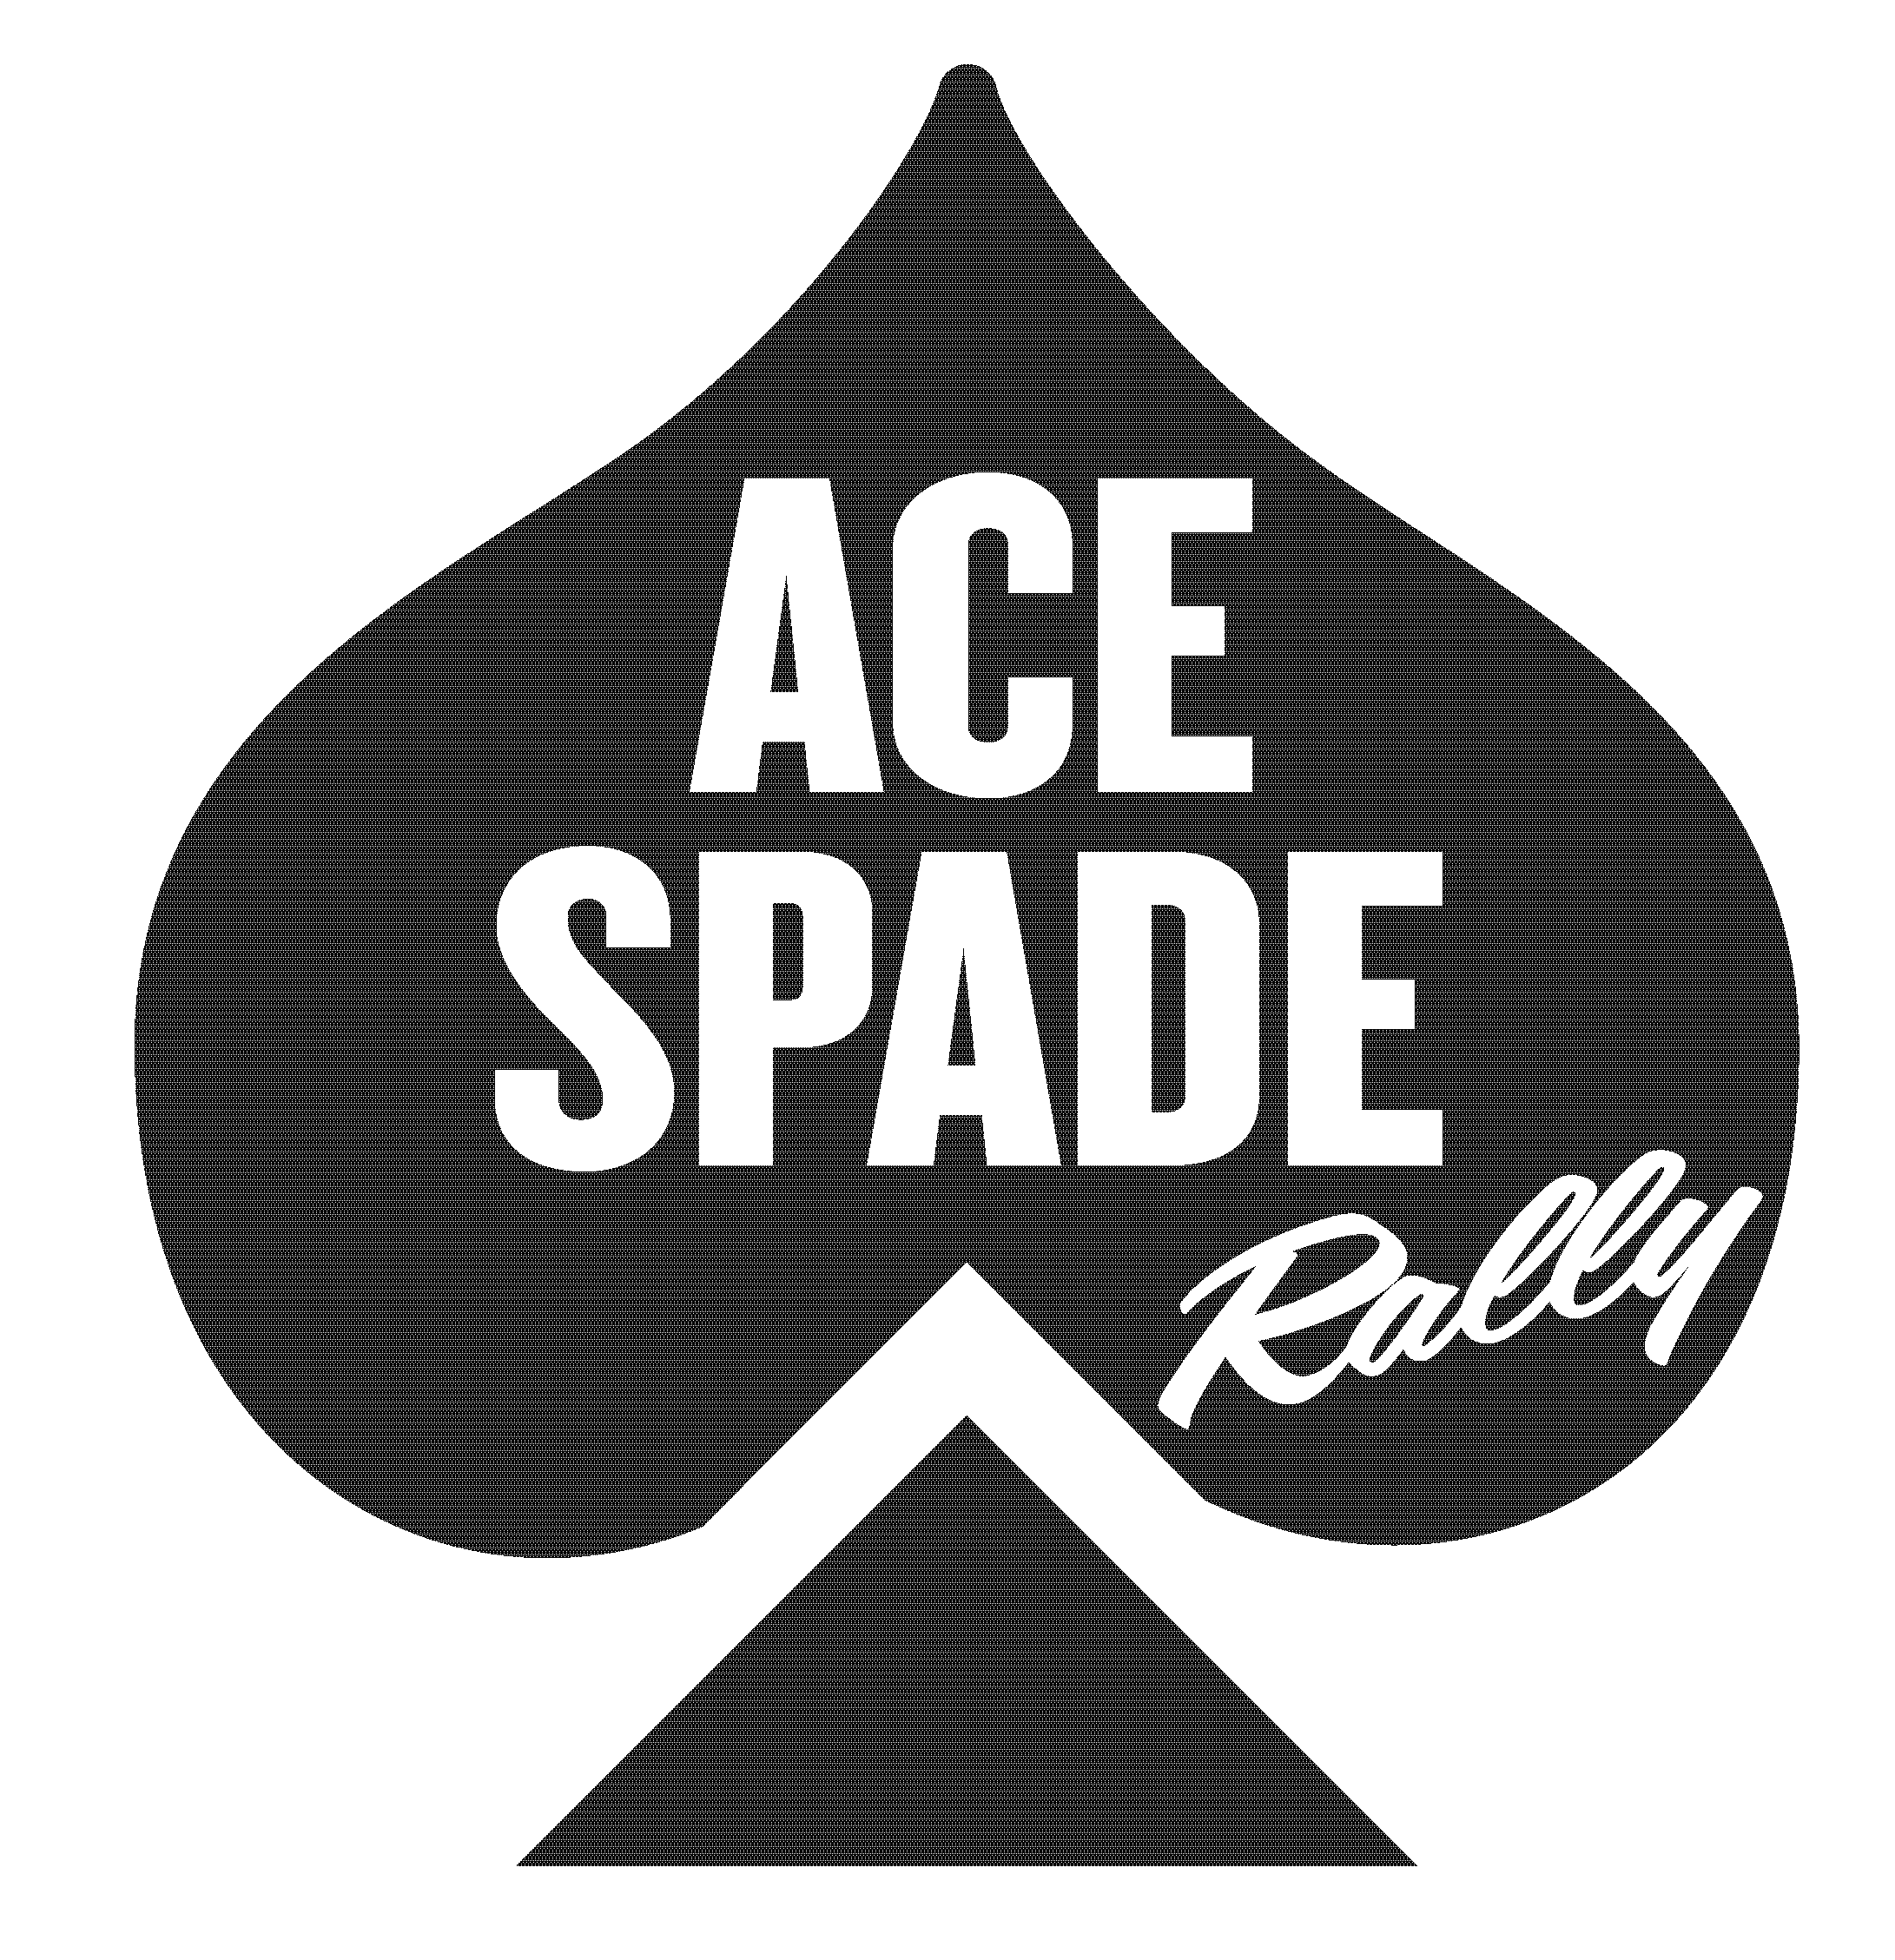 Ace of Spades White Star Logo - Ace Spade Rally Featuring Exotic Cars At Tune Up Party